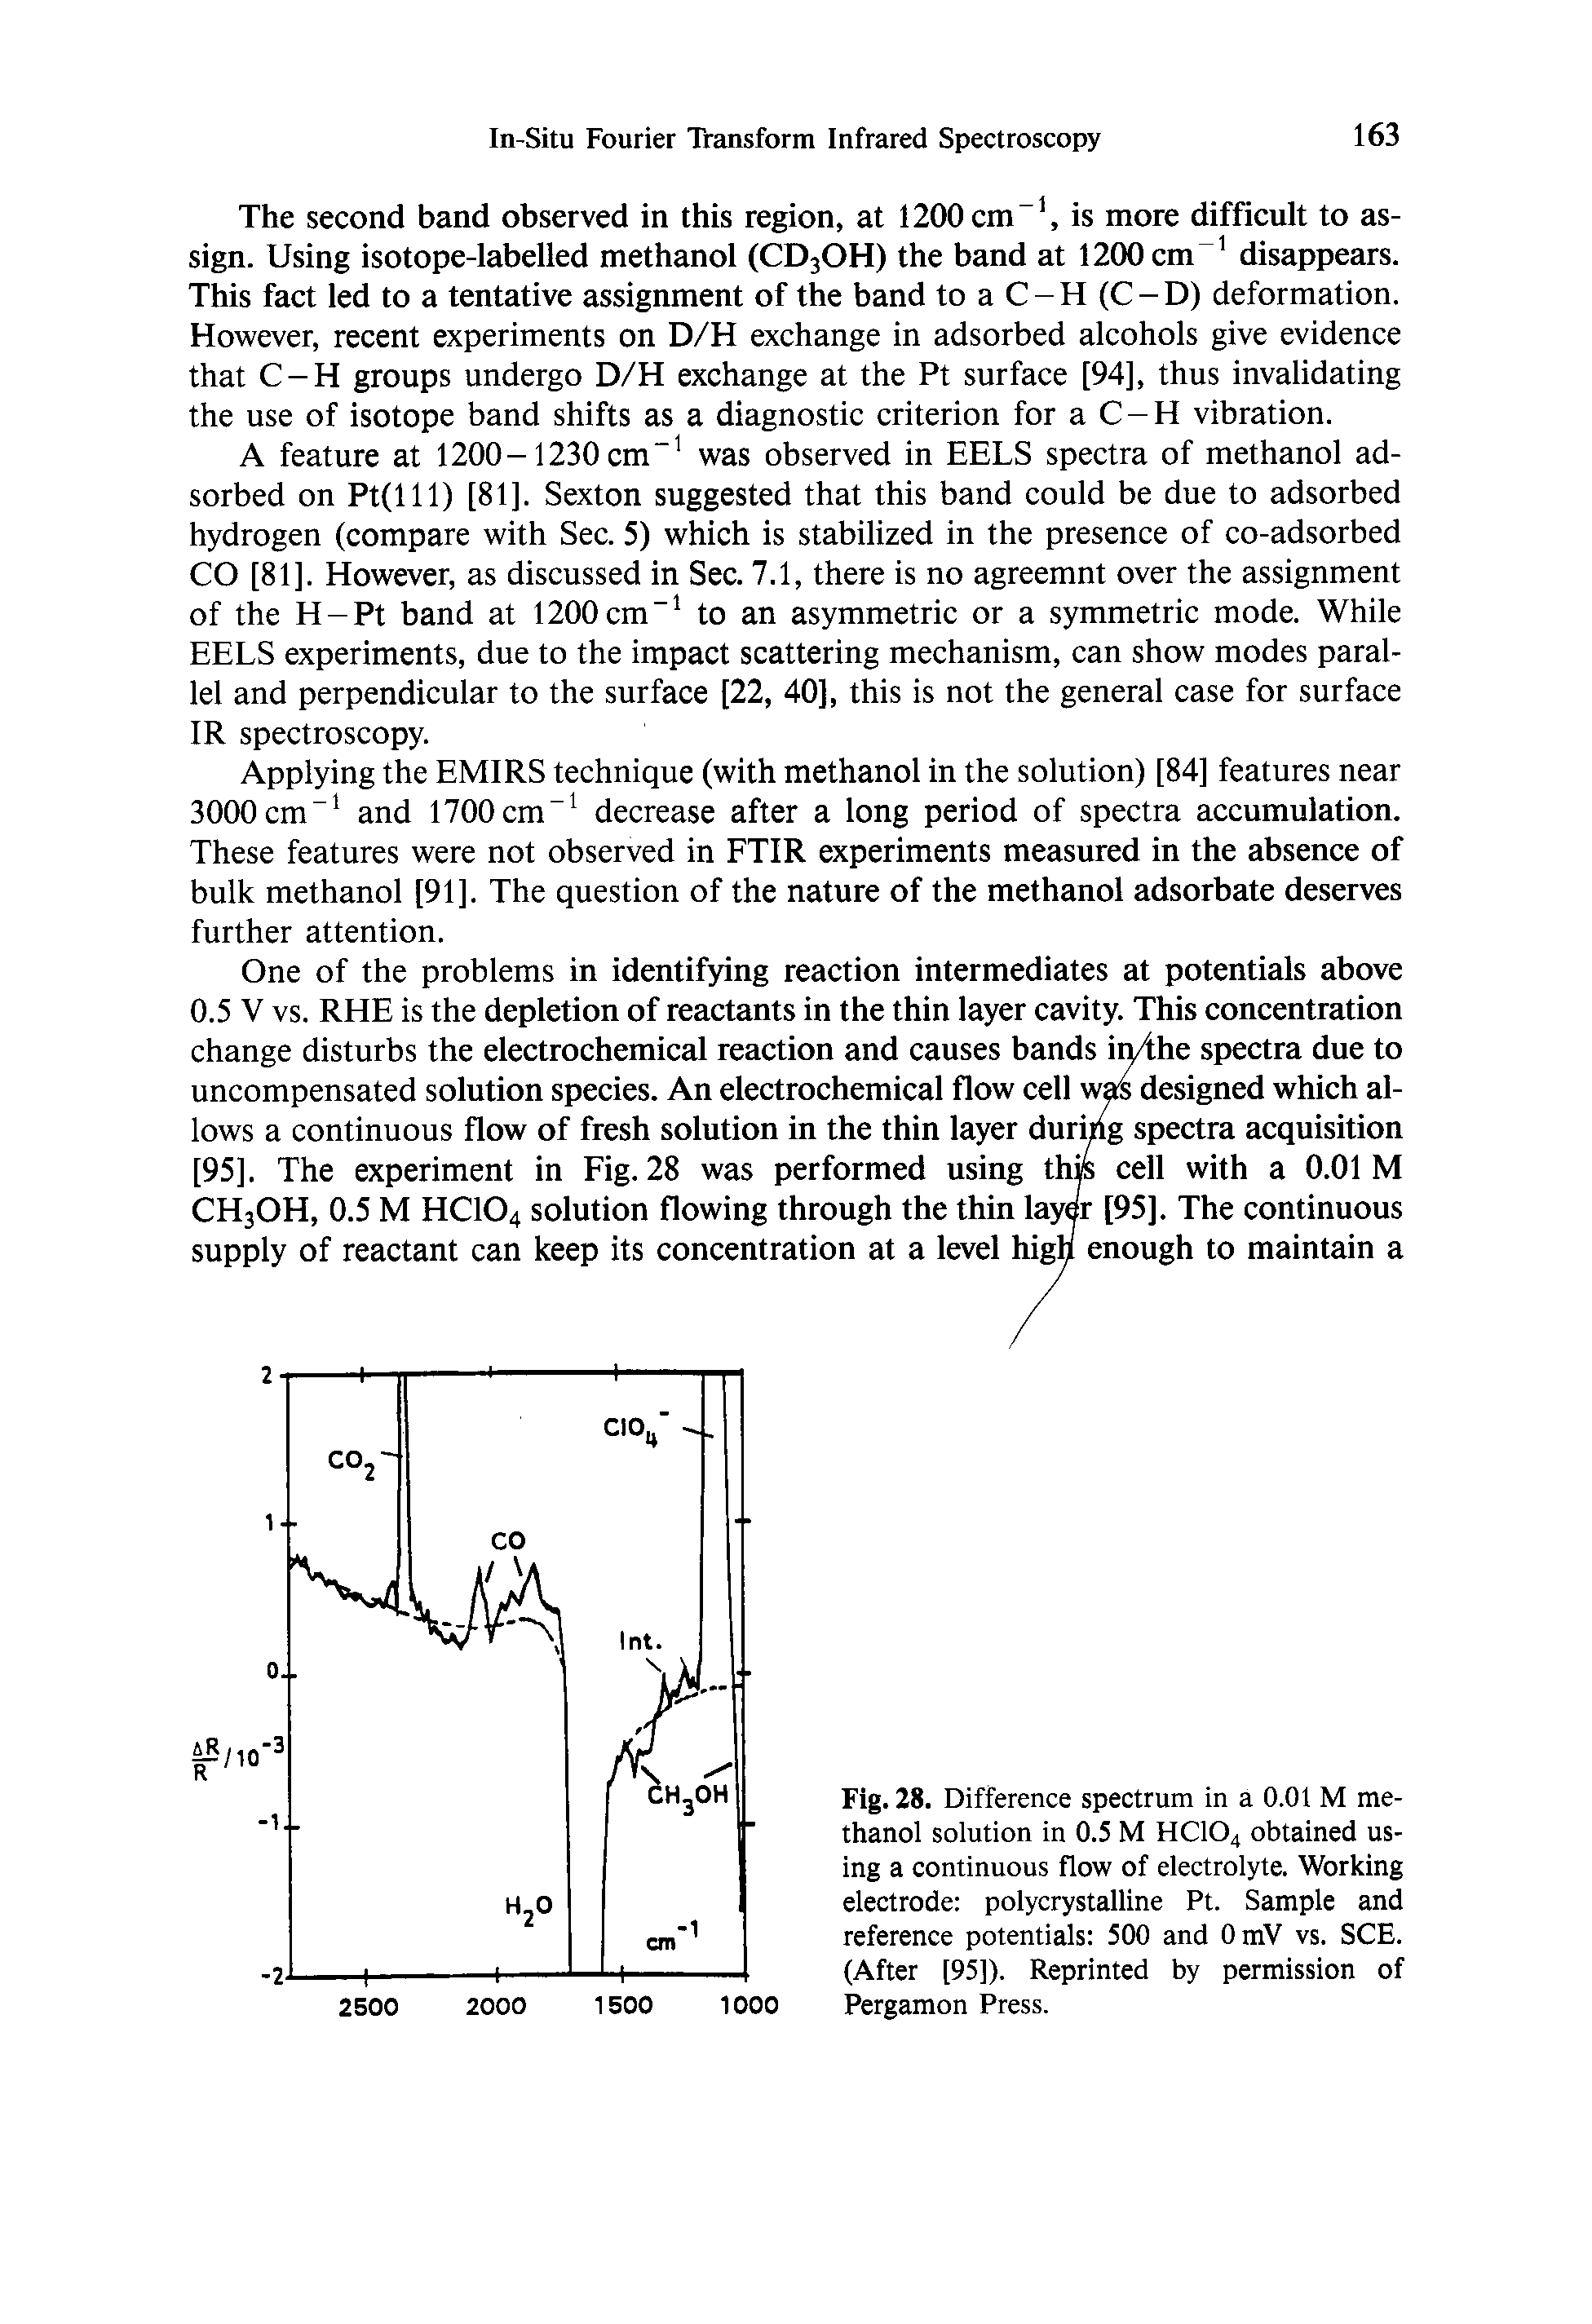 Fig. 28. Difference spectrum in a 0.01 M methanol solution in 0.5 M HCIO4 obtained using a continuous flow of electrolyte. Working electrode polycrystalline Pt. Sample and reference potentials 500 and OmV vs. SCE. (After [95]). Reprinted by permission of Pergamon Press.